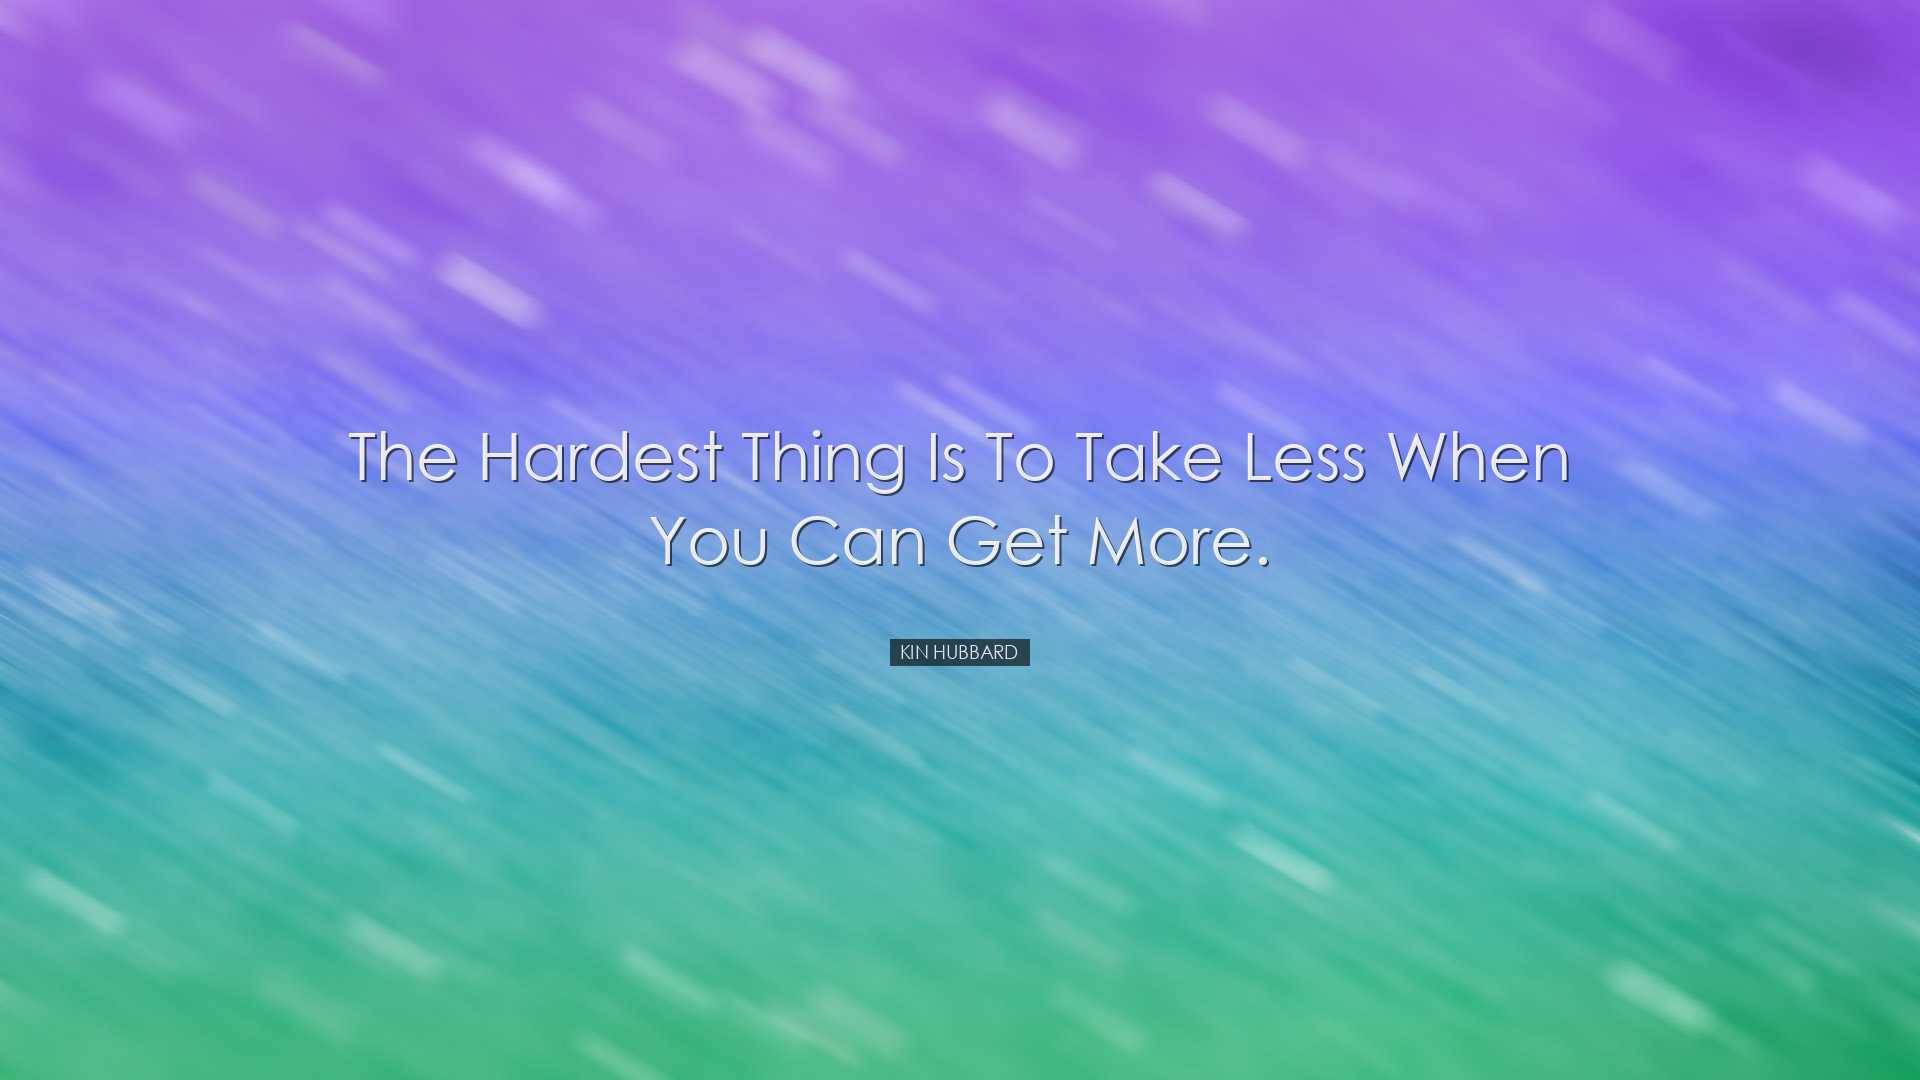 The hardest thing is to take less when you can get more. - Kin Hub